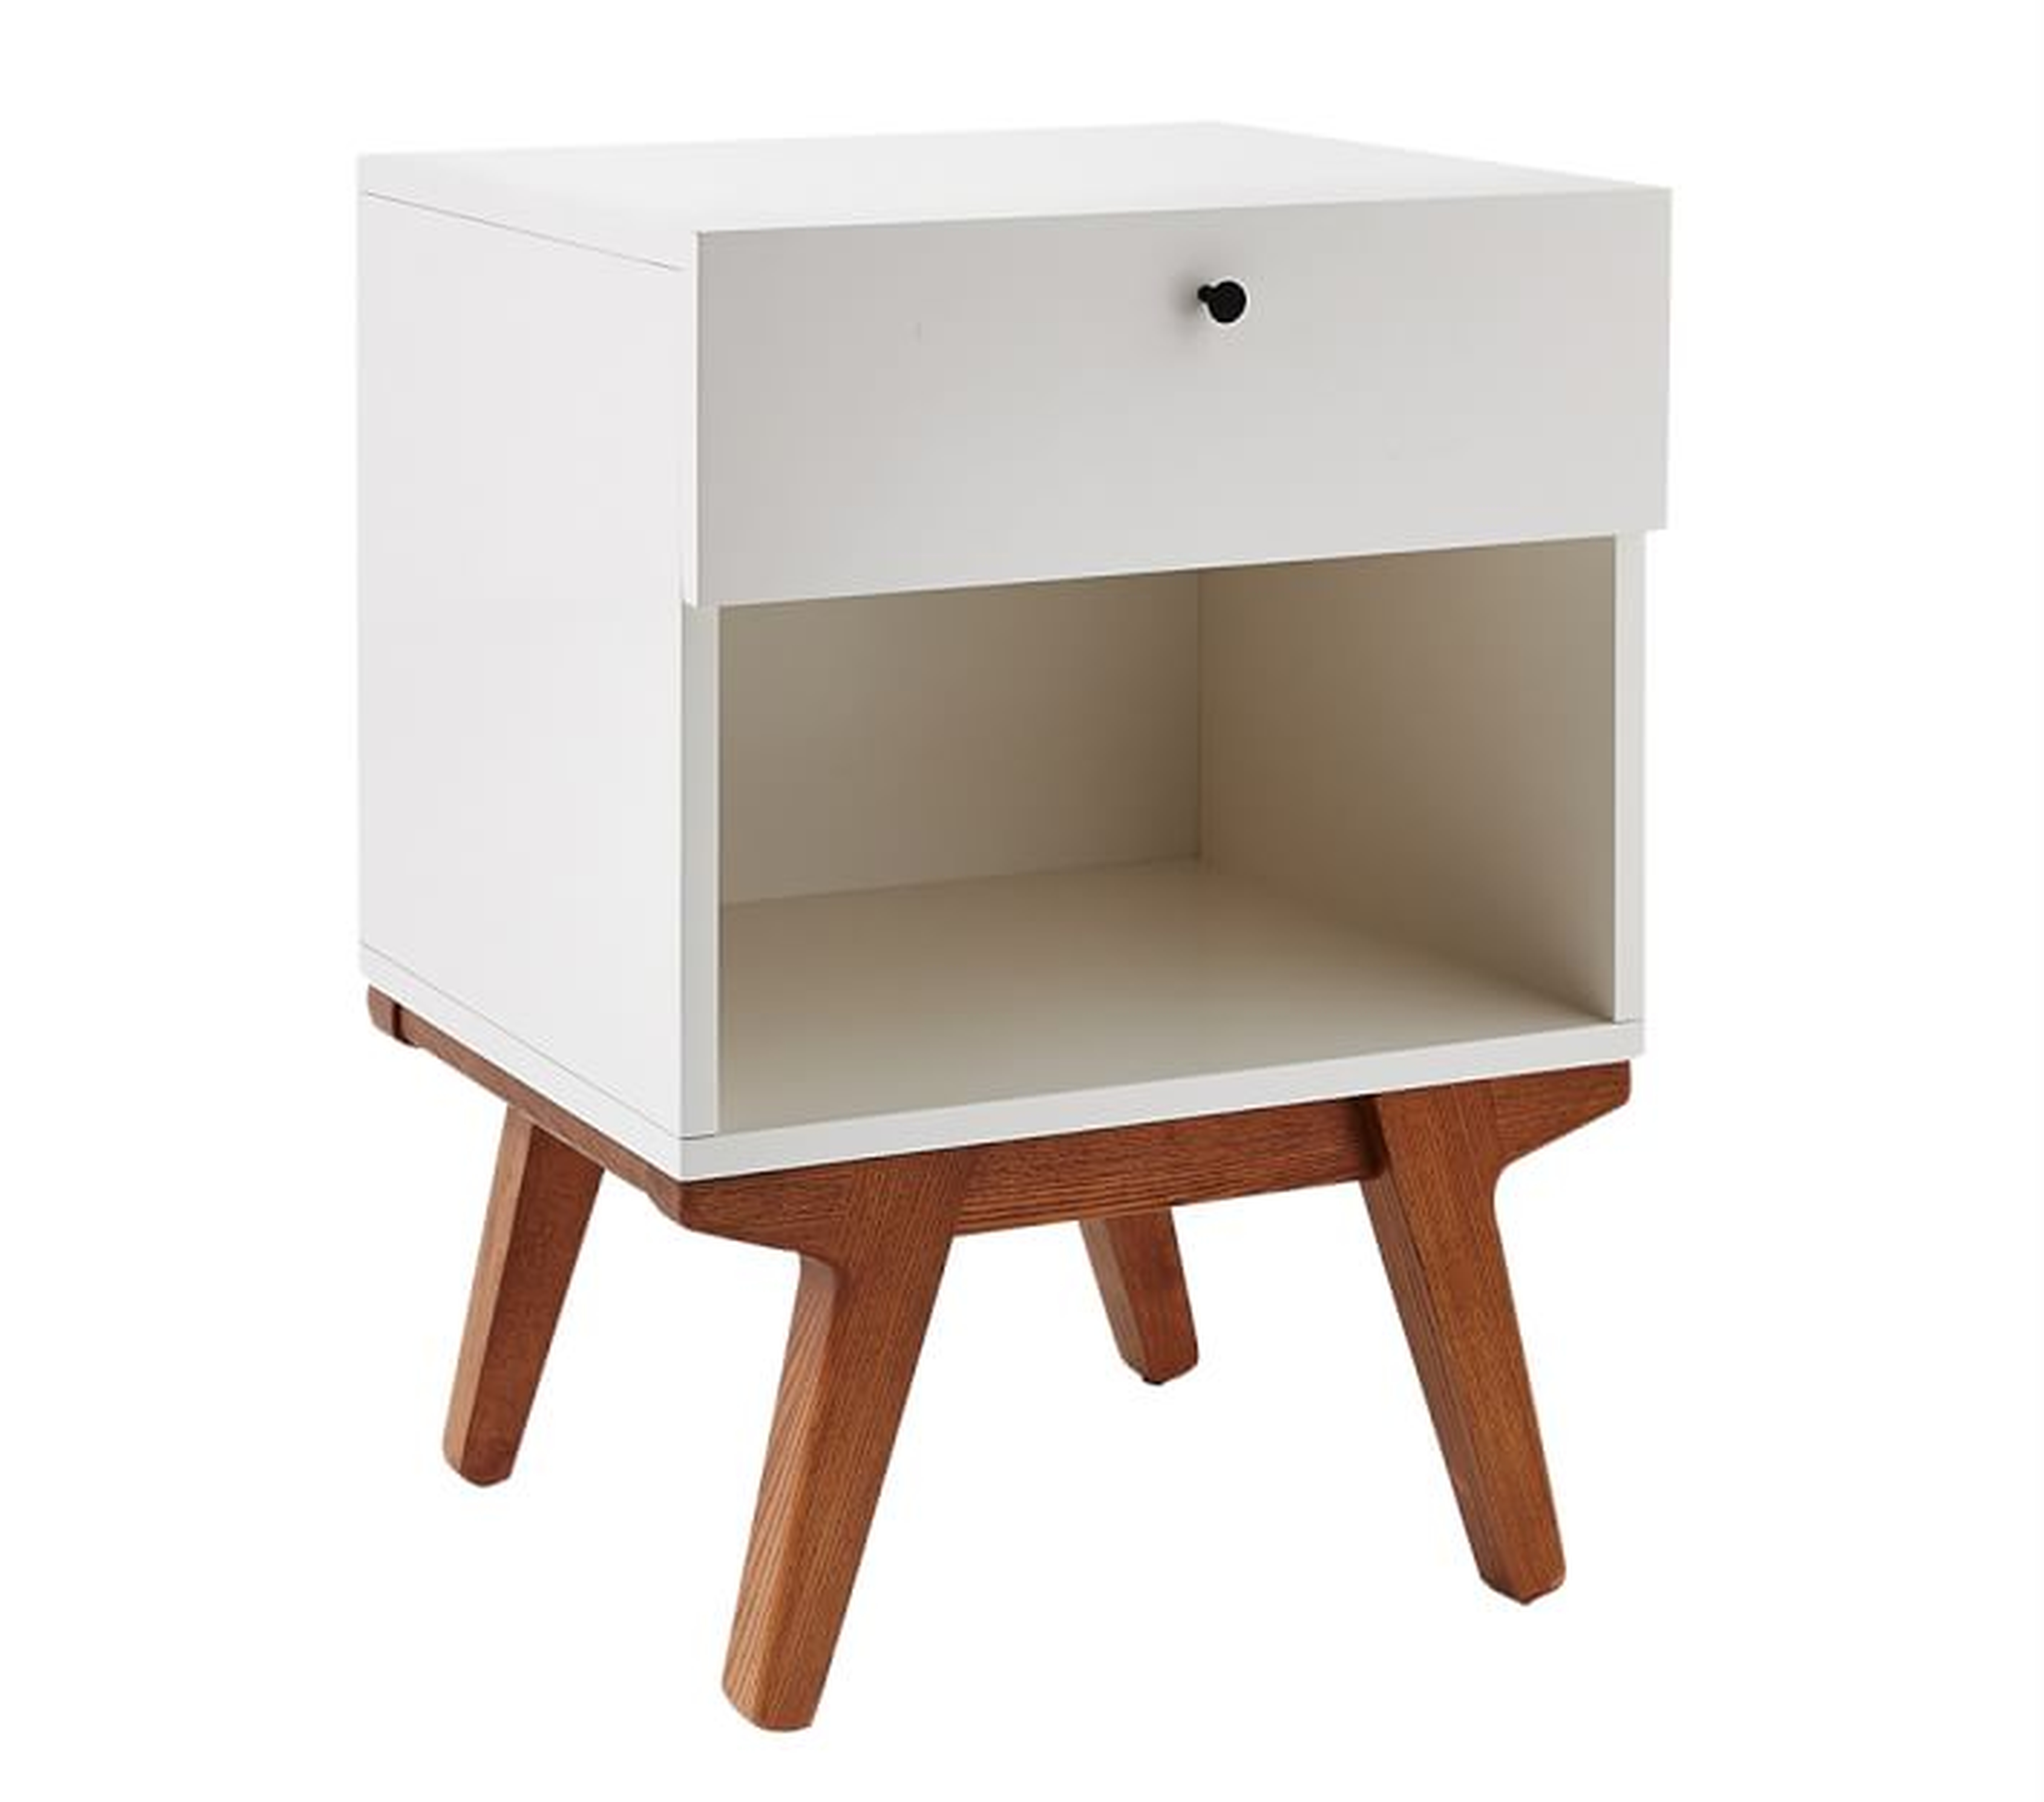 west elm x pbk Modern Nightstand, White Lacquer - Pottery Barn Kids